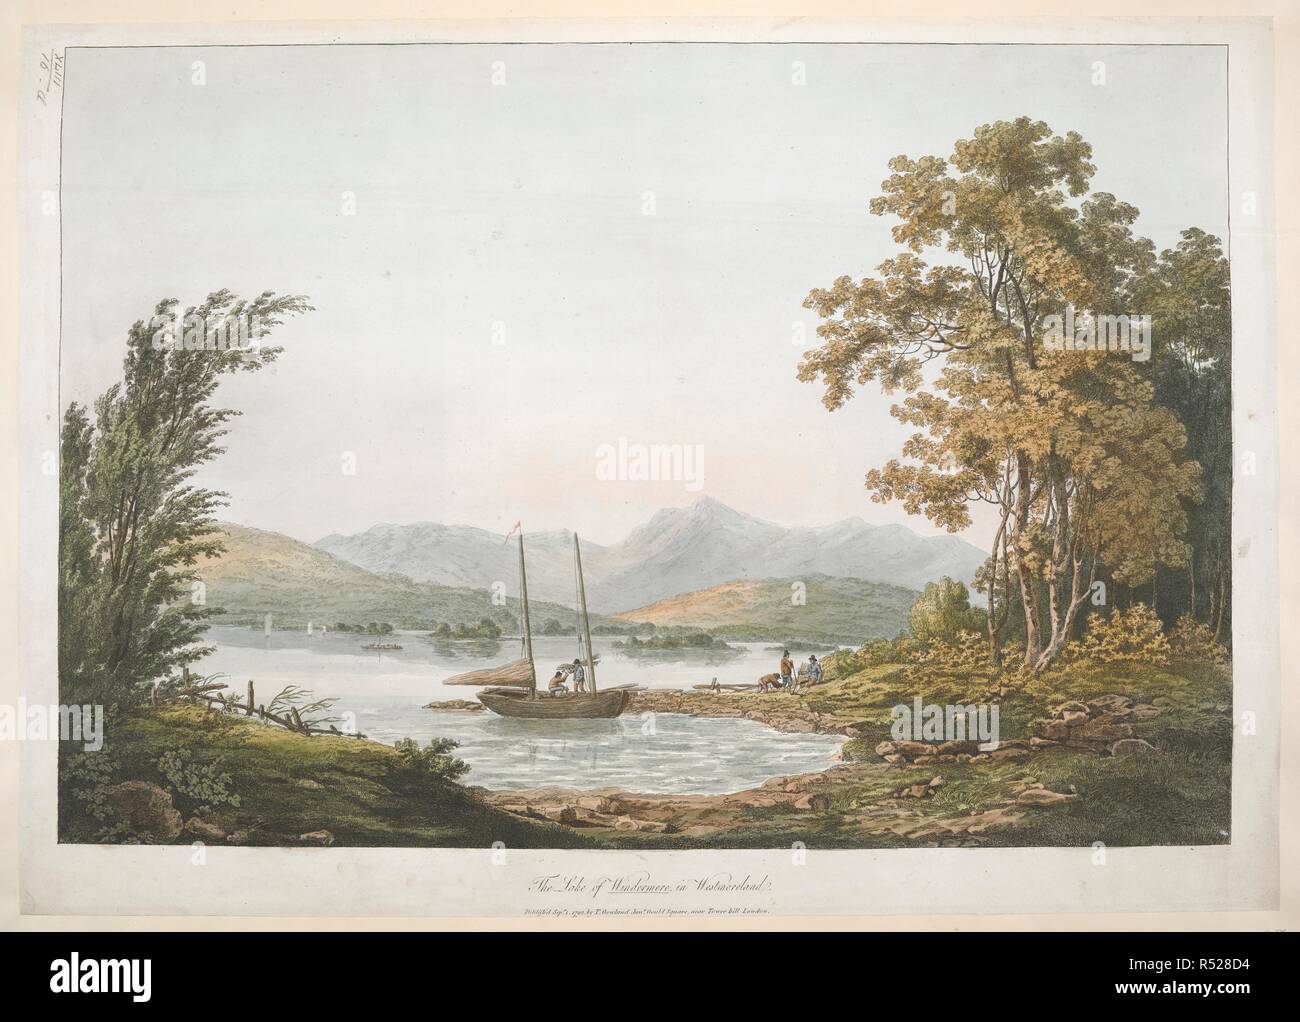 The Lake of Windermere, in Westmoreland. A view across Lake Windermere in Cumbria; figures by a boat in the foreground; grass, foliage, rocks and trees throughout the scene; hills in the distance.    . The Lake of Windermere, in Westmoreland. [London] : Publish'd Sepr 1 1792 by T. Gowland Junr Gould Square, near Tower Hill London., [September 1 1792]. 1 print : etching and stipple with hand-colouring ; sheet 43 x 60.6 cm. Source: Maps. K.Top.43.16.d. Stock Photo